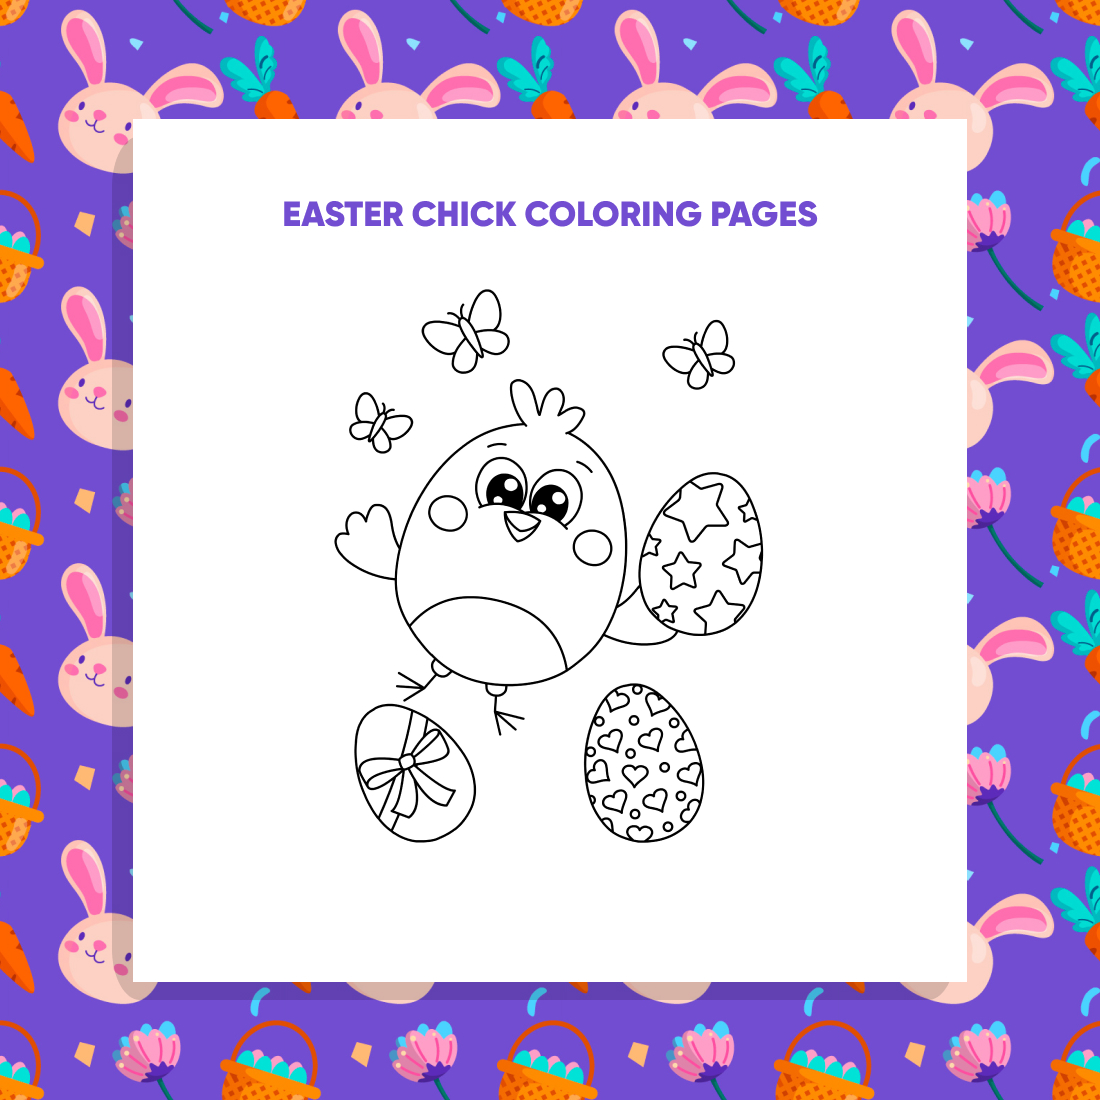 Easter Chick Coloring Pages preview image.